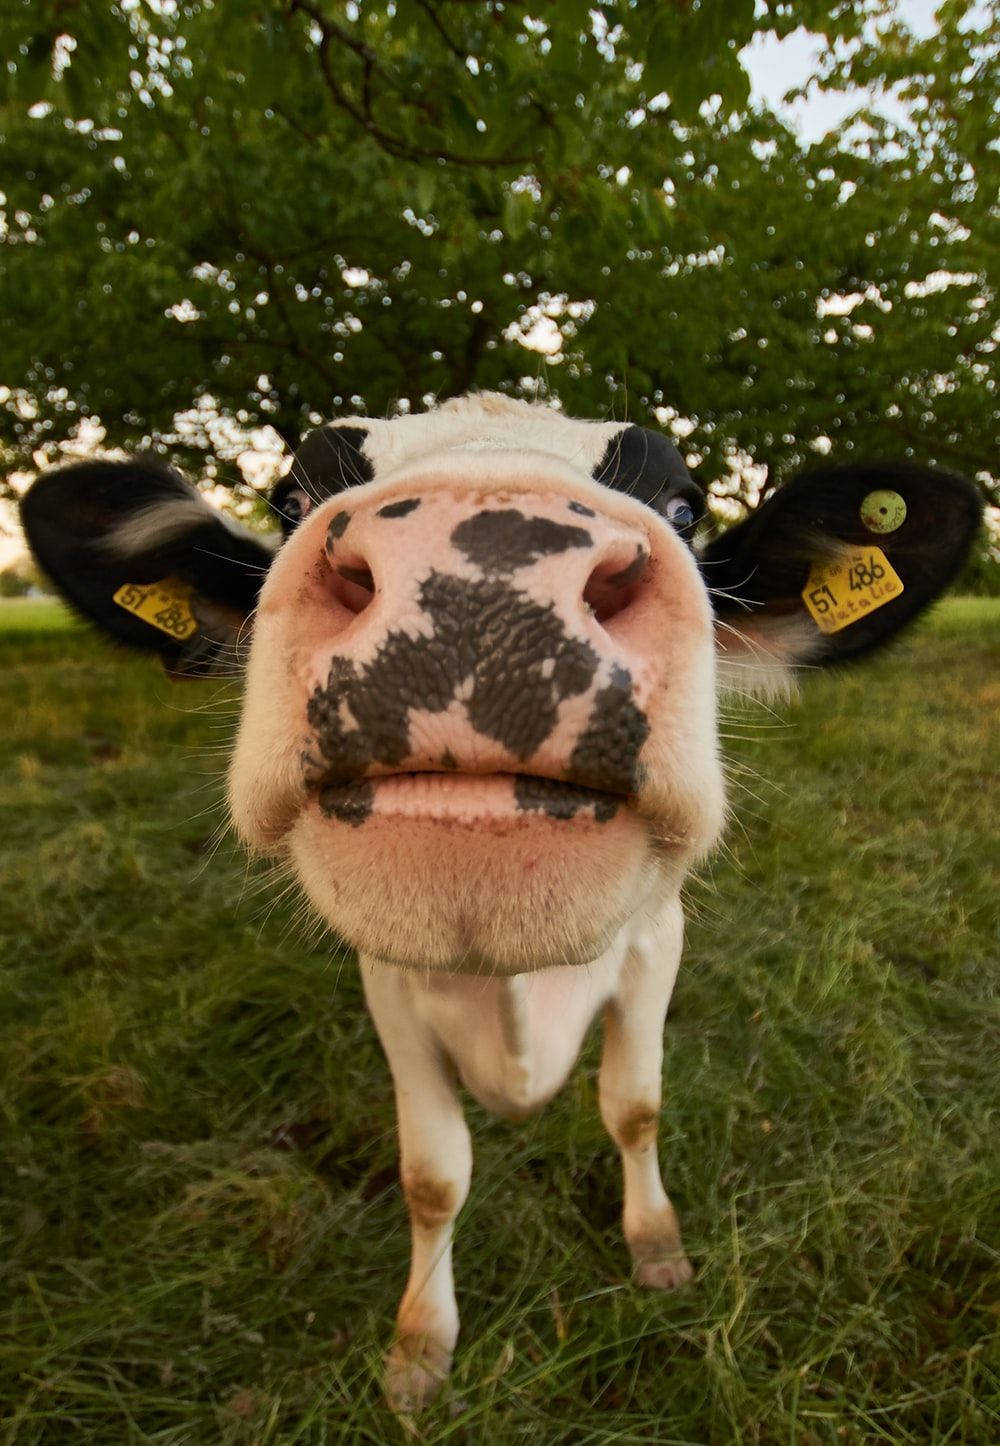 A cow with black spots and a golden nose. Wallpaper